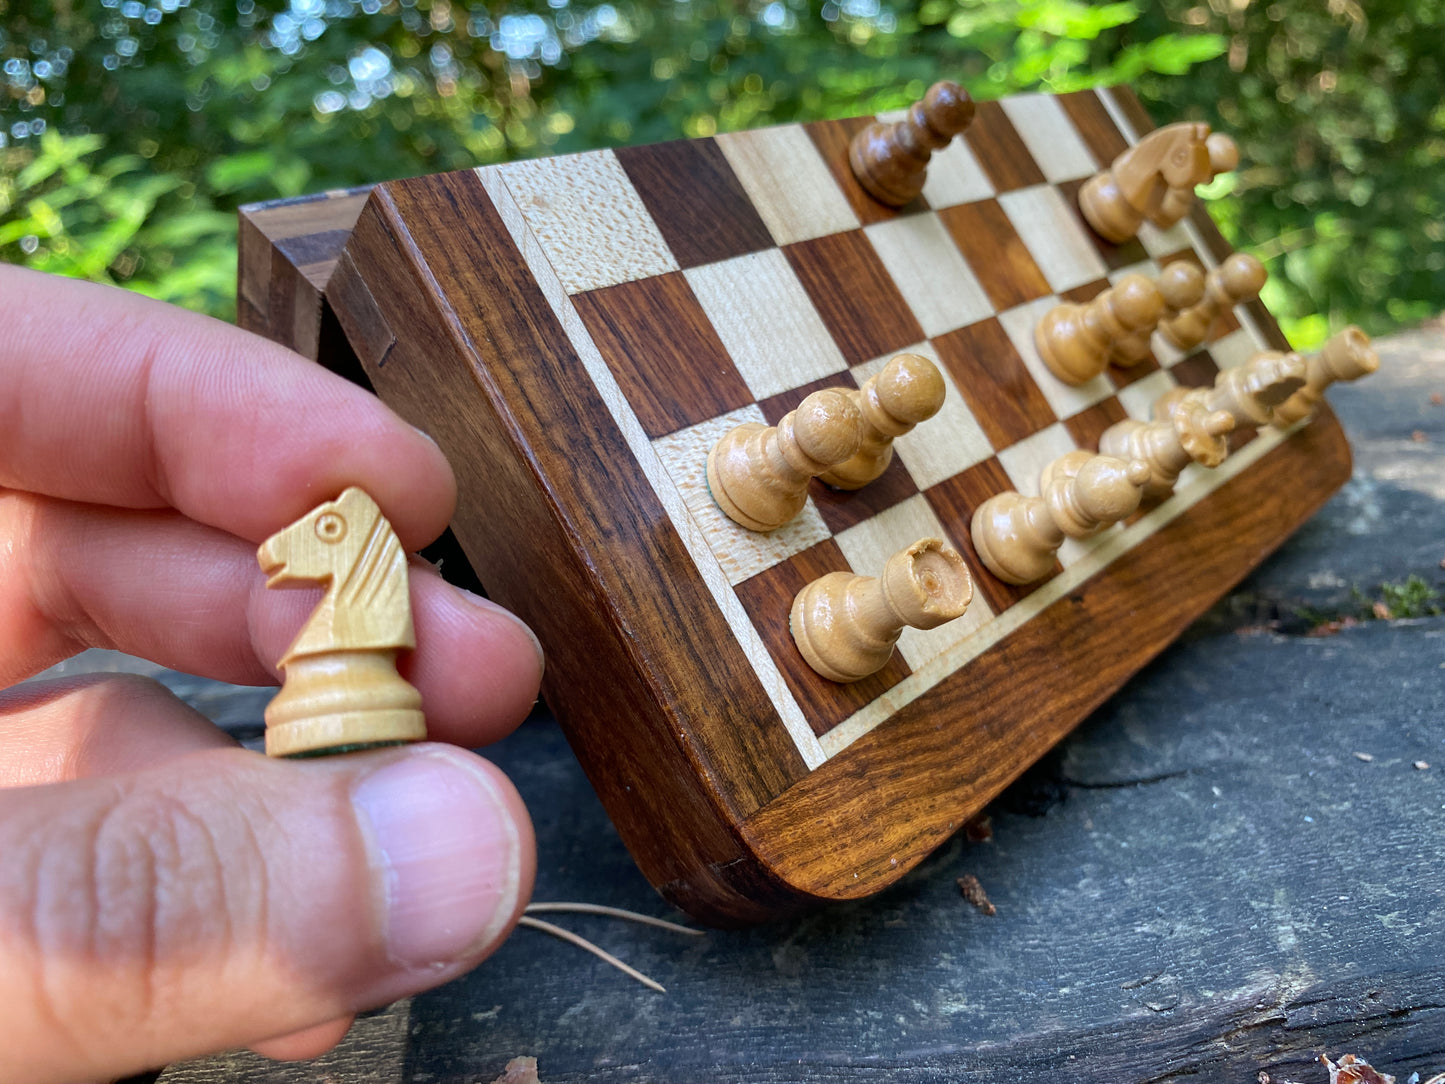 Travel chess set - Mini Chess Set - Magnetic Wooden Chess Sets with Board 7" (18 cm) - gift for him - 7 x 3.6 x 0.7 inches